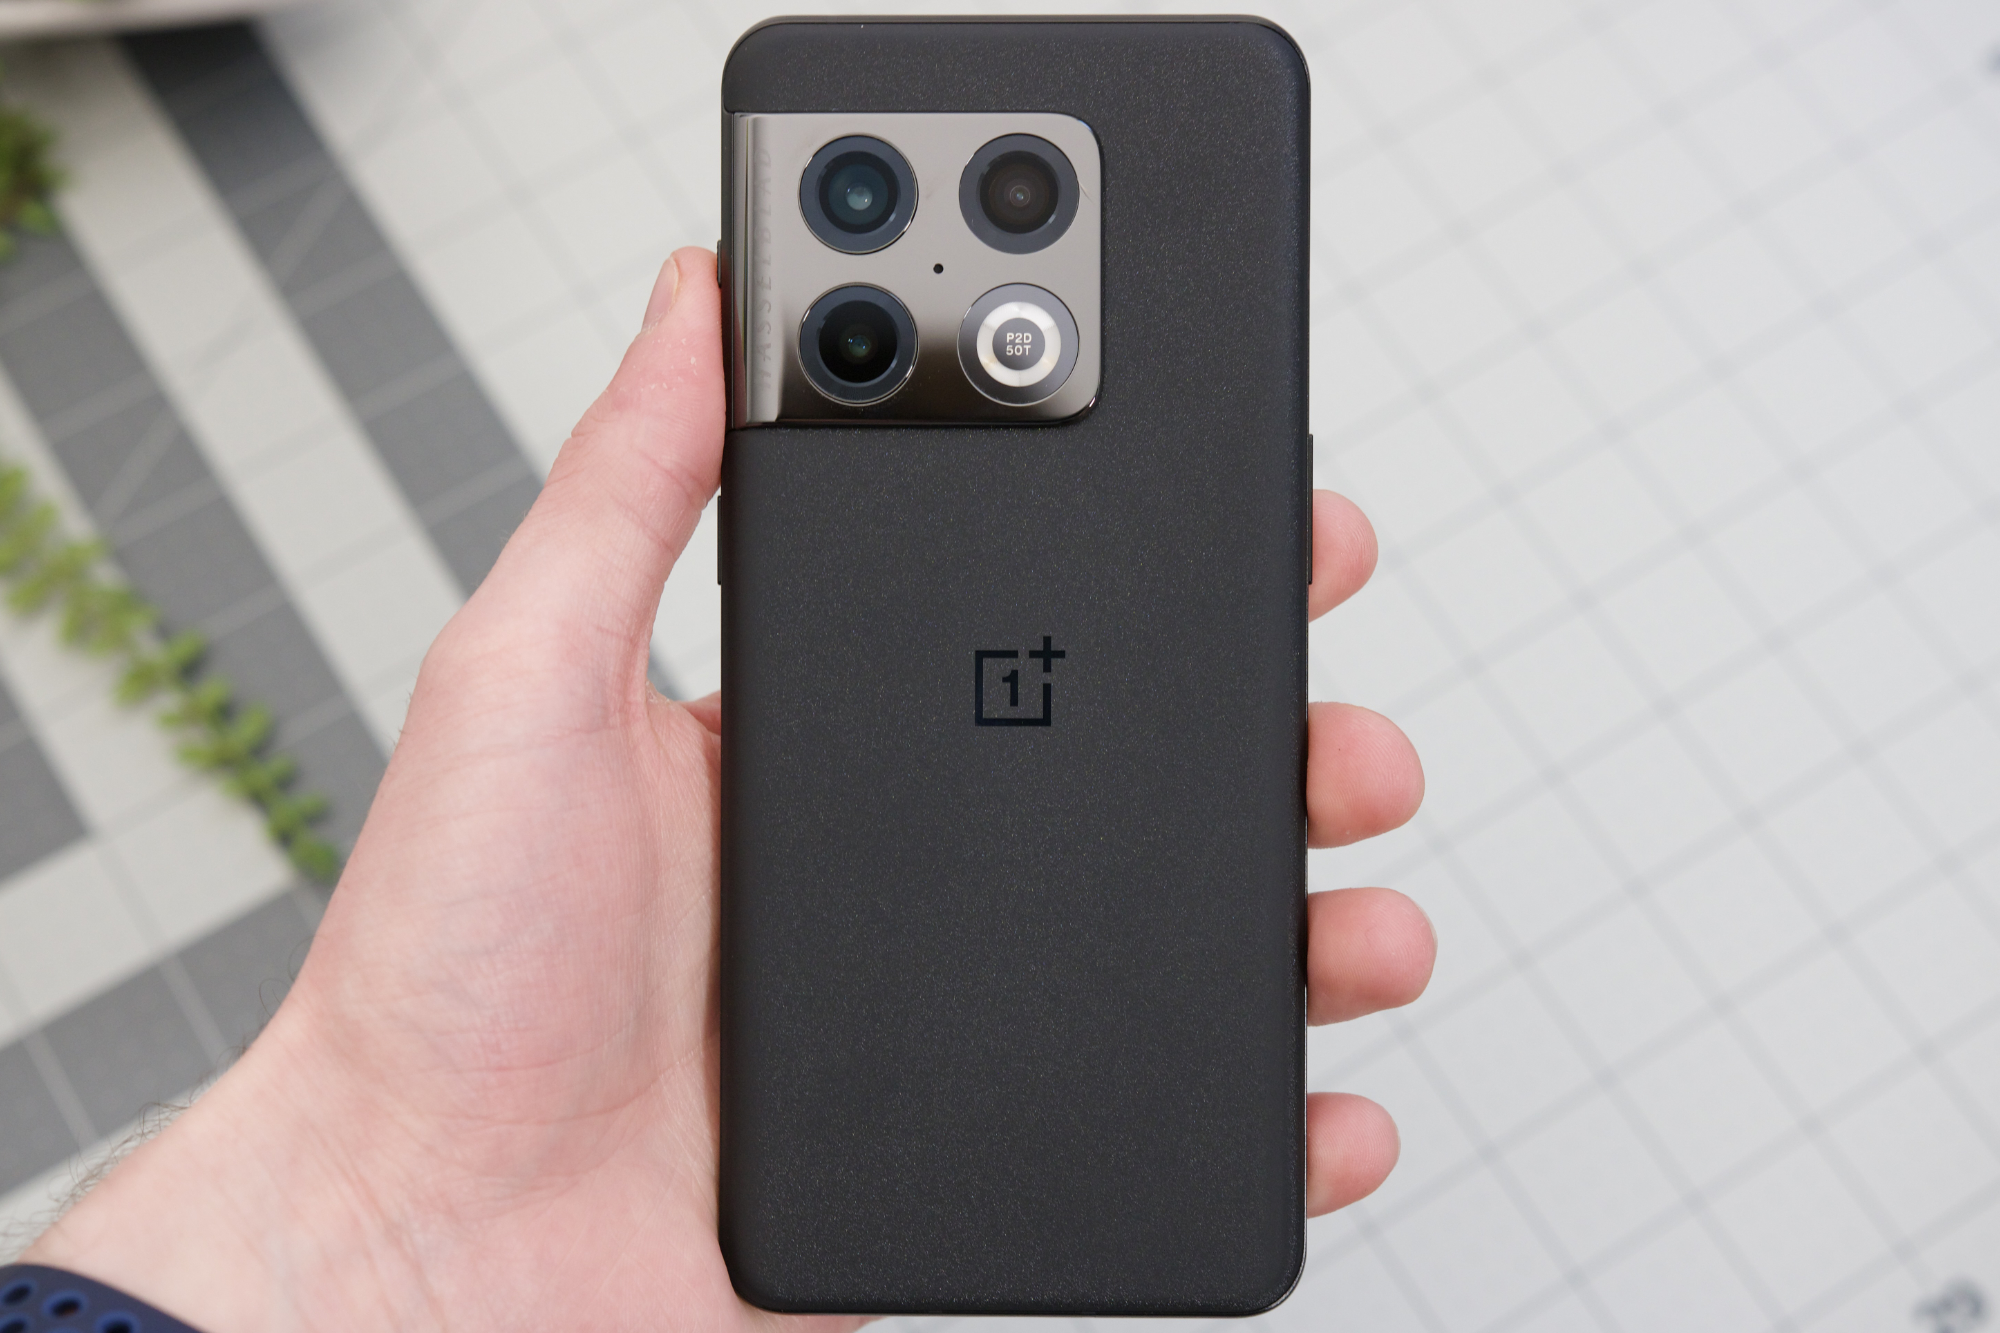 Earlier than expected: OnePlus says OnePlus 10 Pro is coming in January